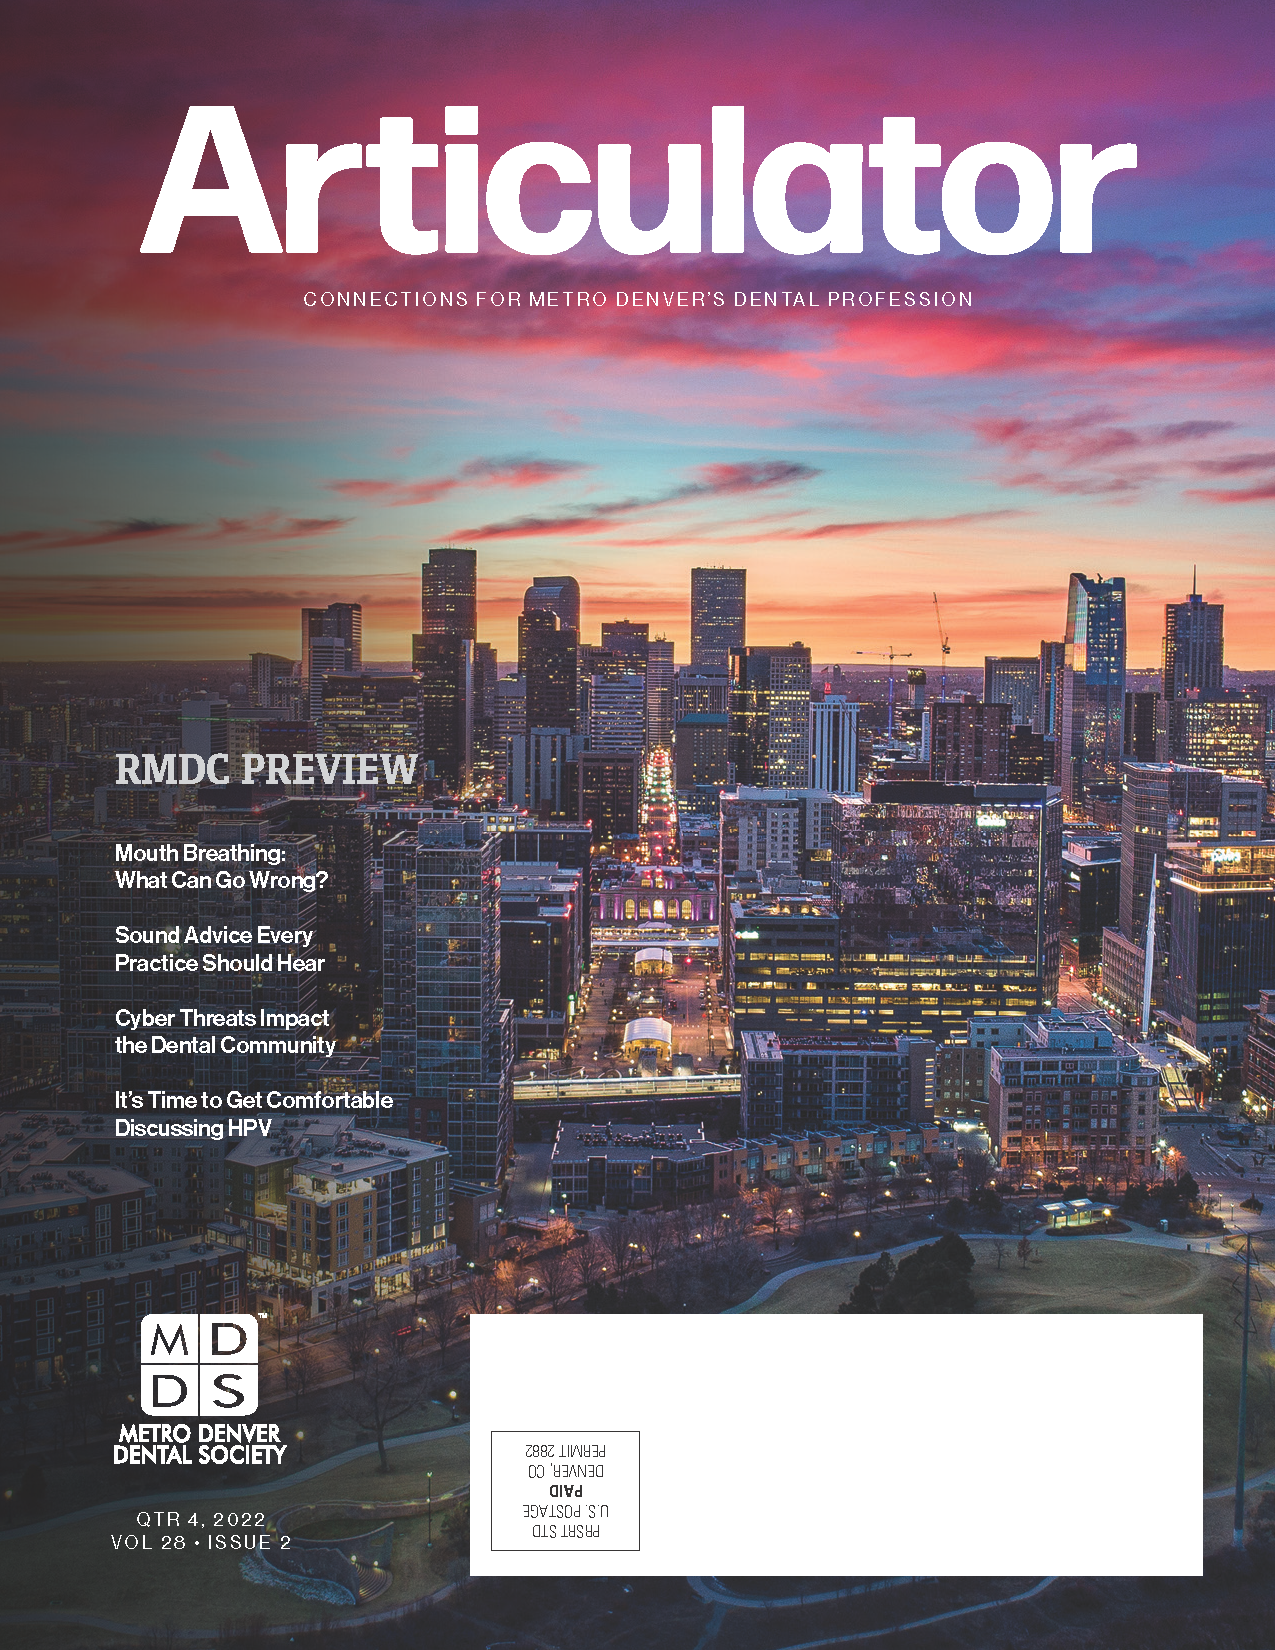 Cover of the Metro Denver Dental Society's Articulator magazine with photograph of the Denver skyline at sunset.